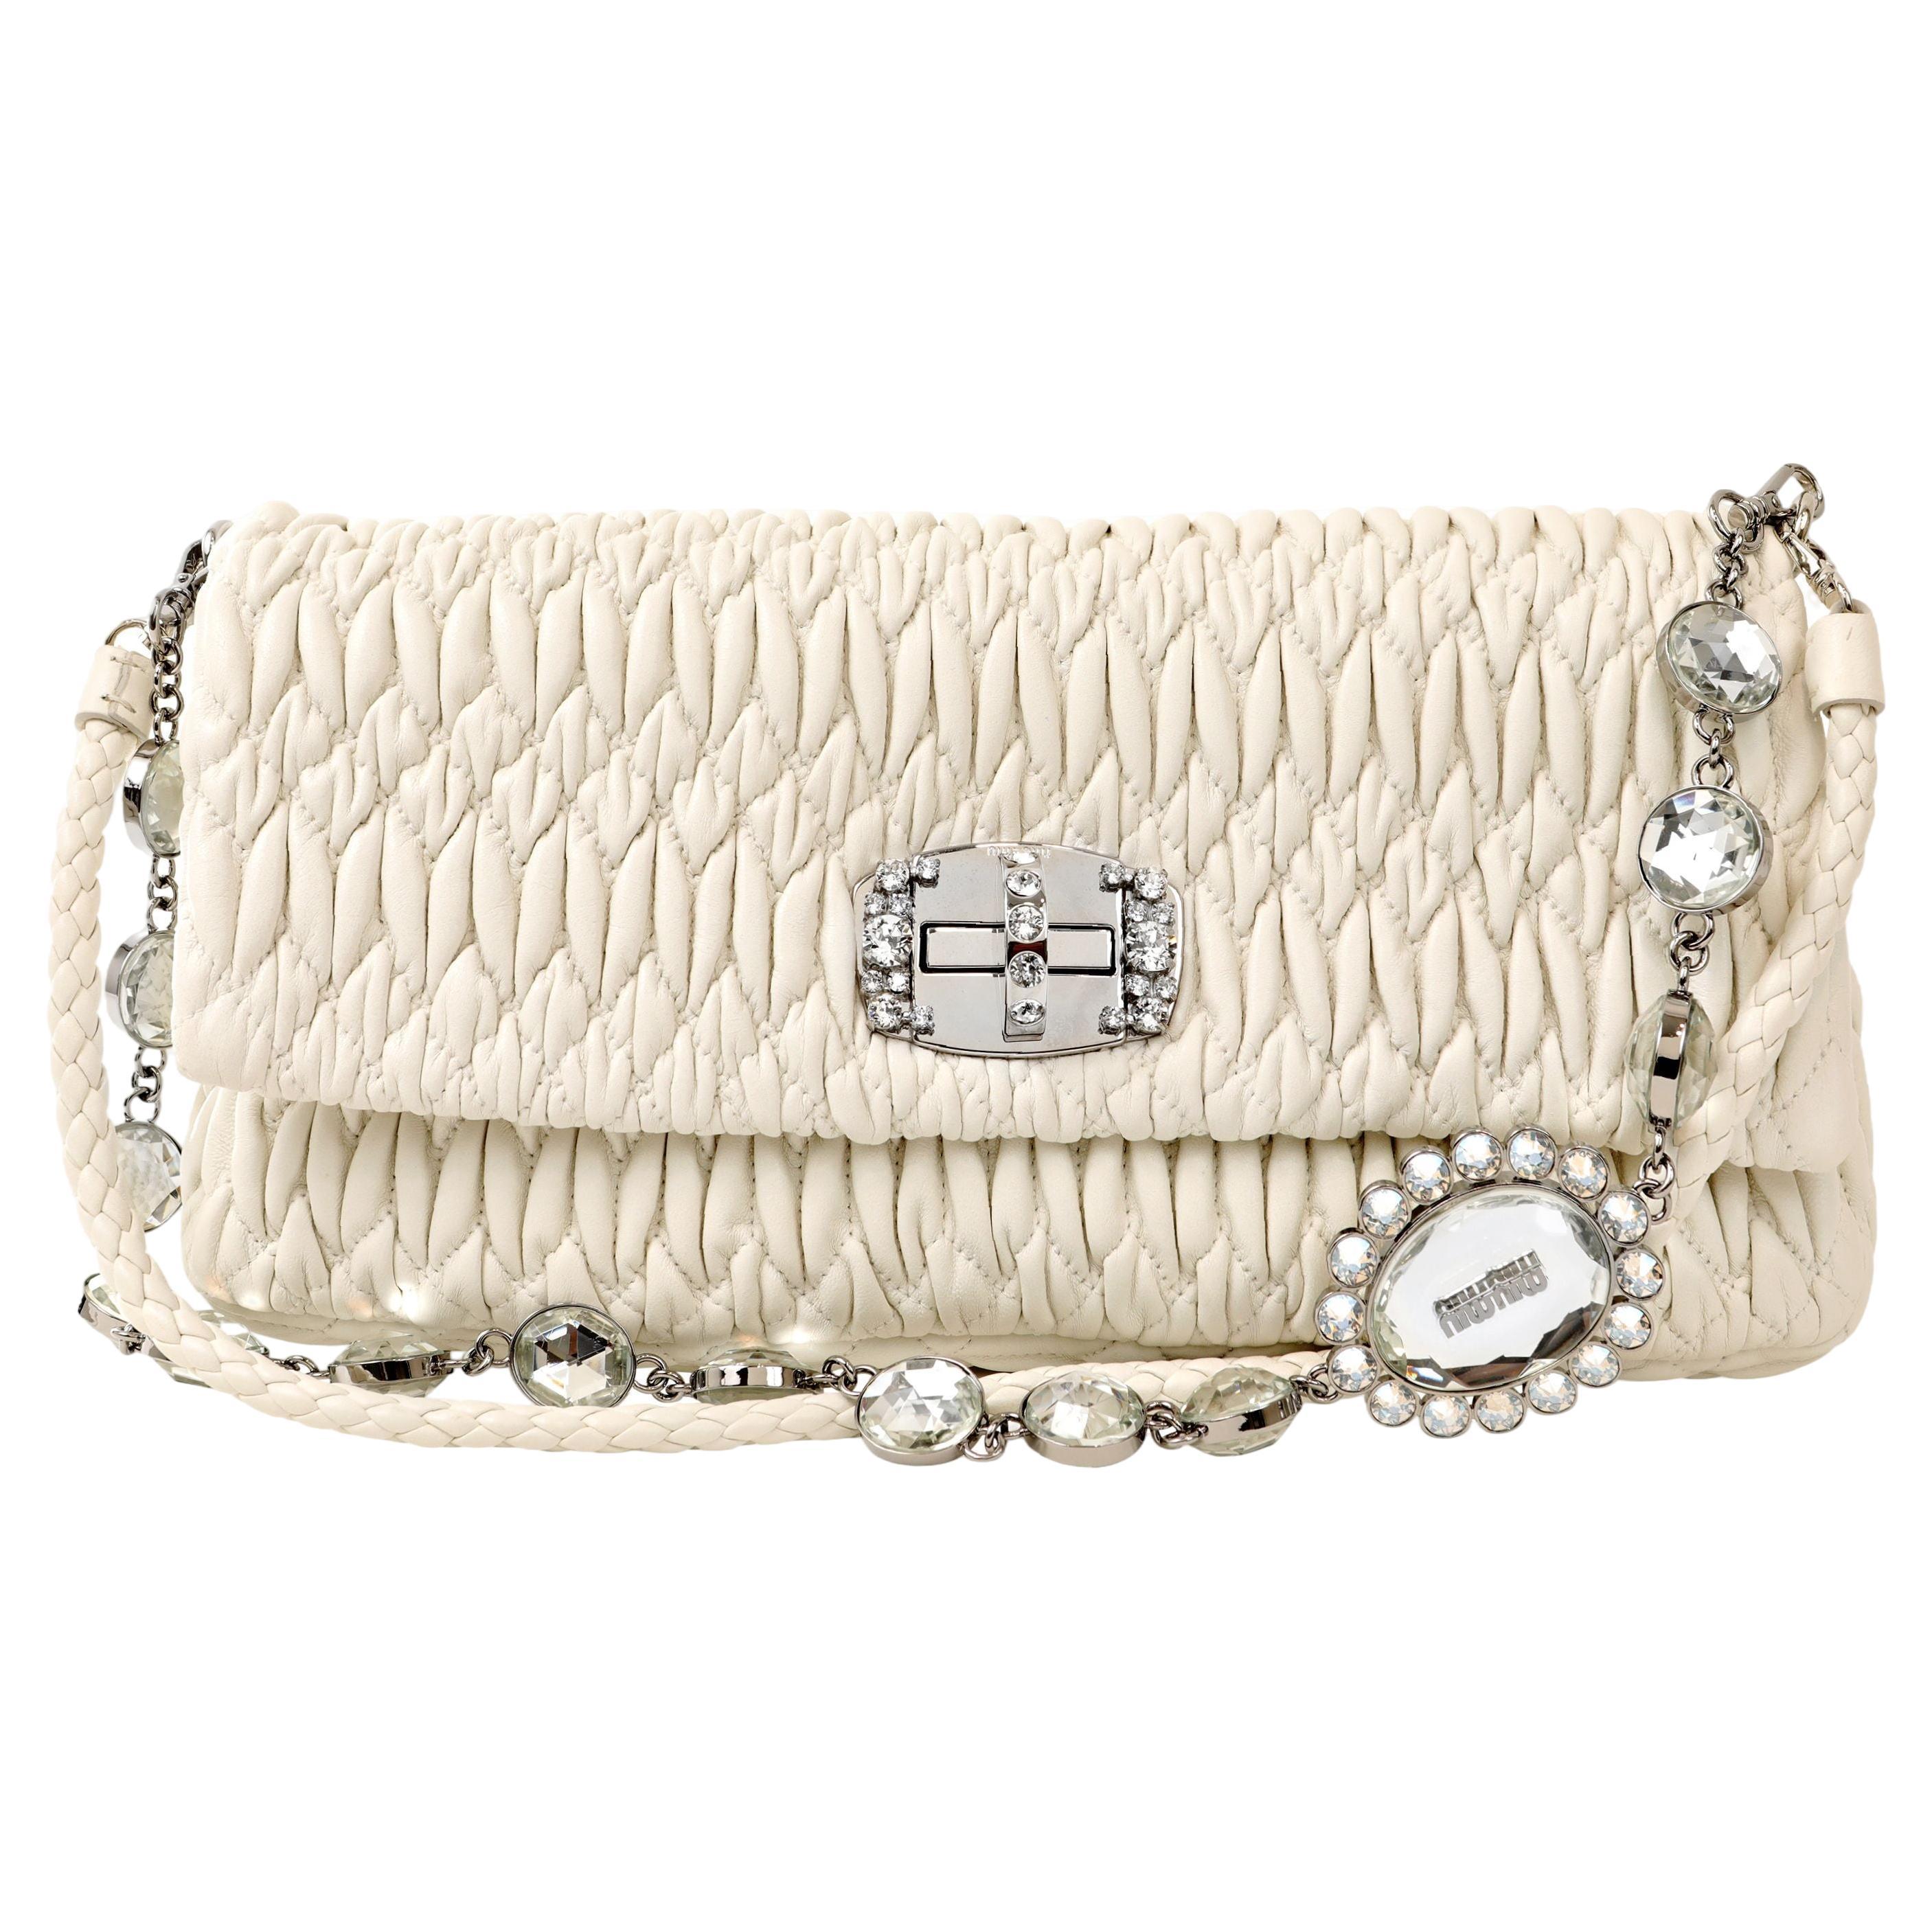 Miu Miu White Iconic Crystal Cloquè Small Bag with Silver Hardware For Sale